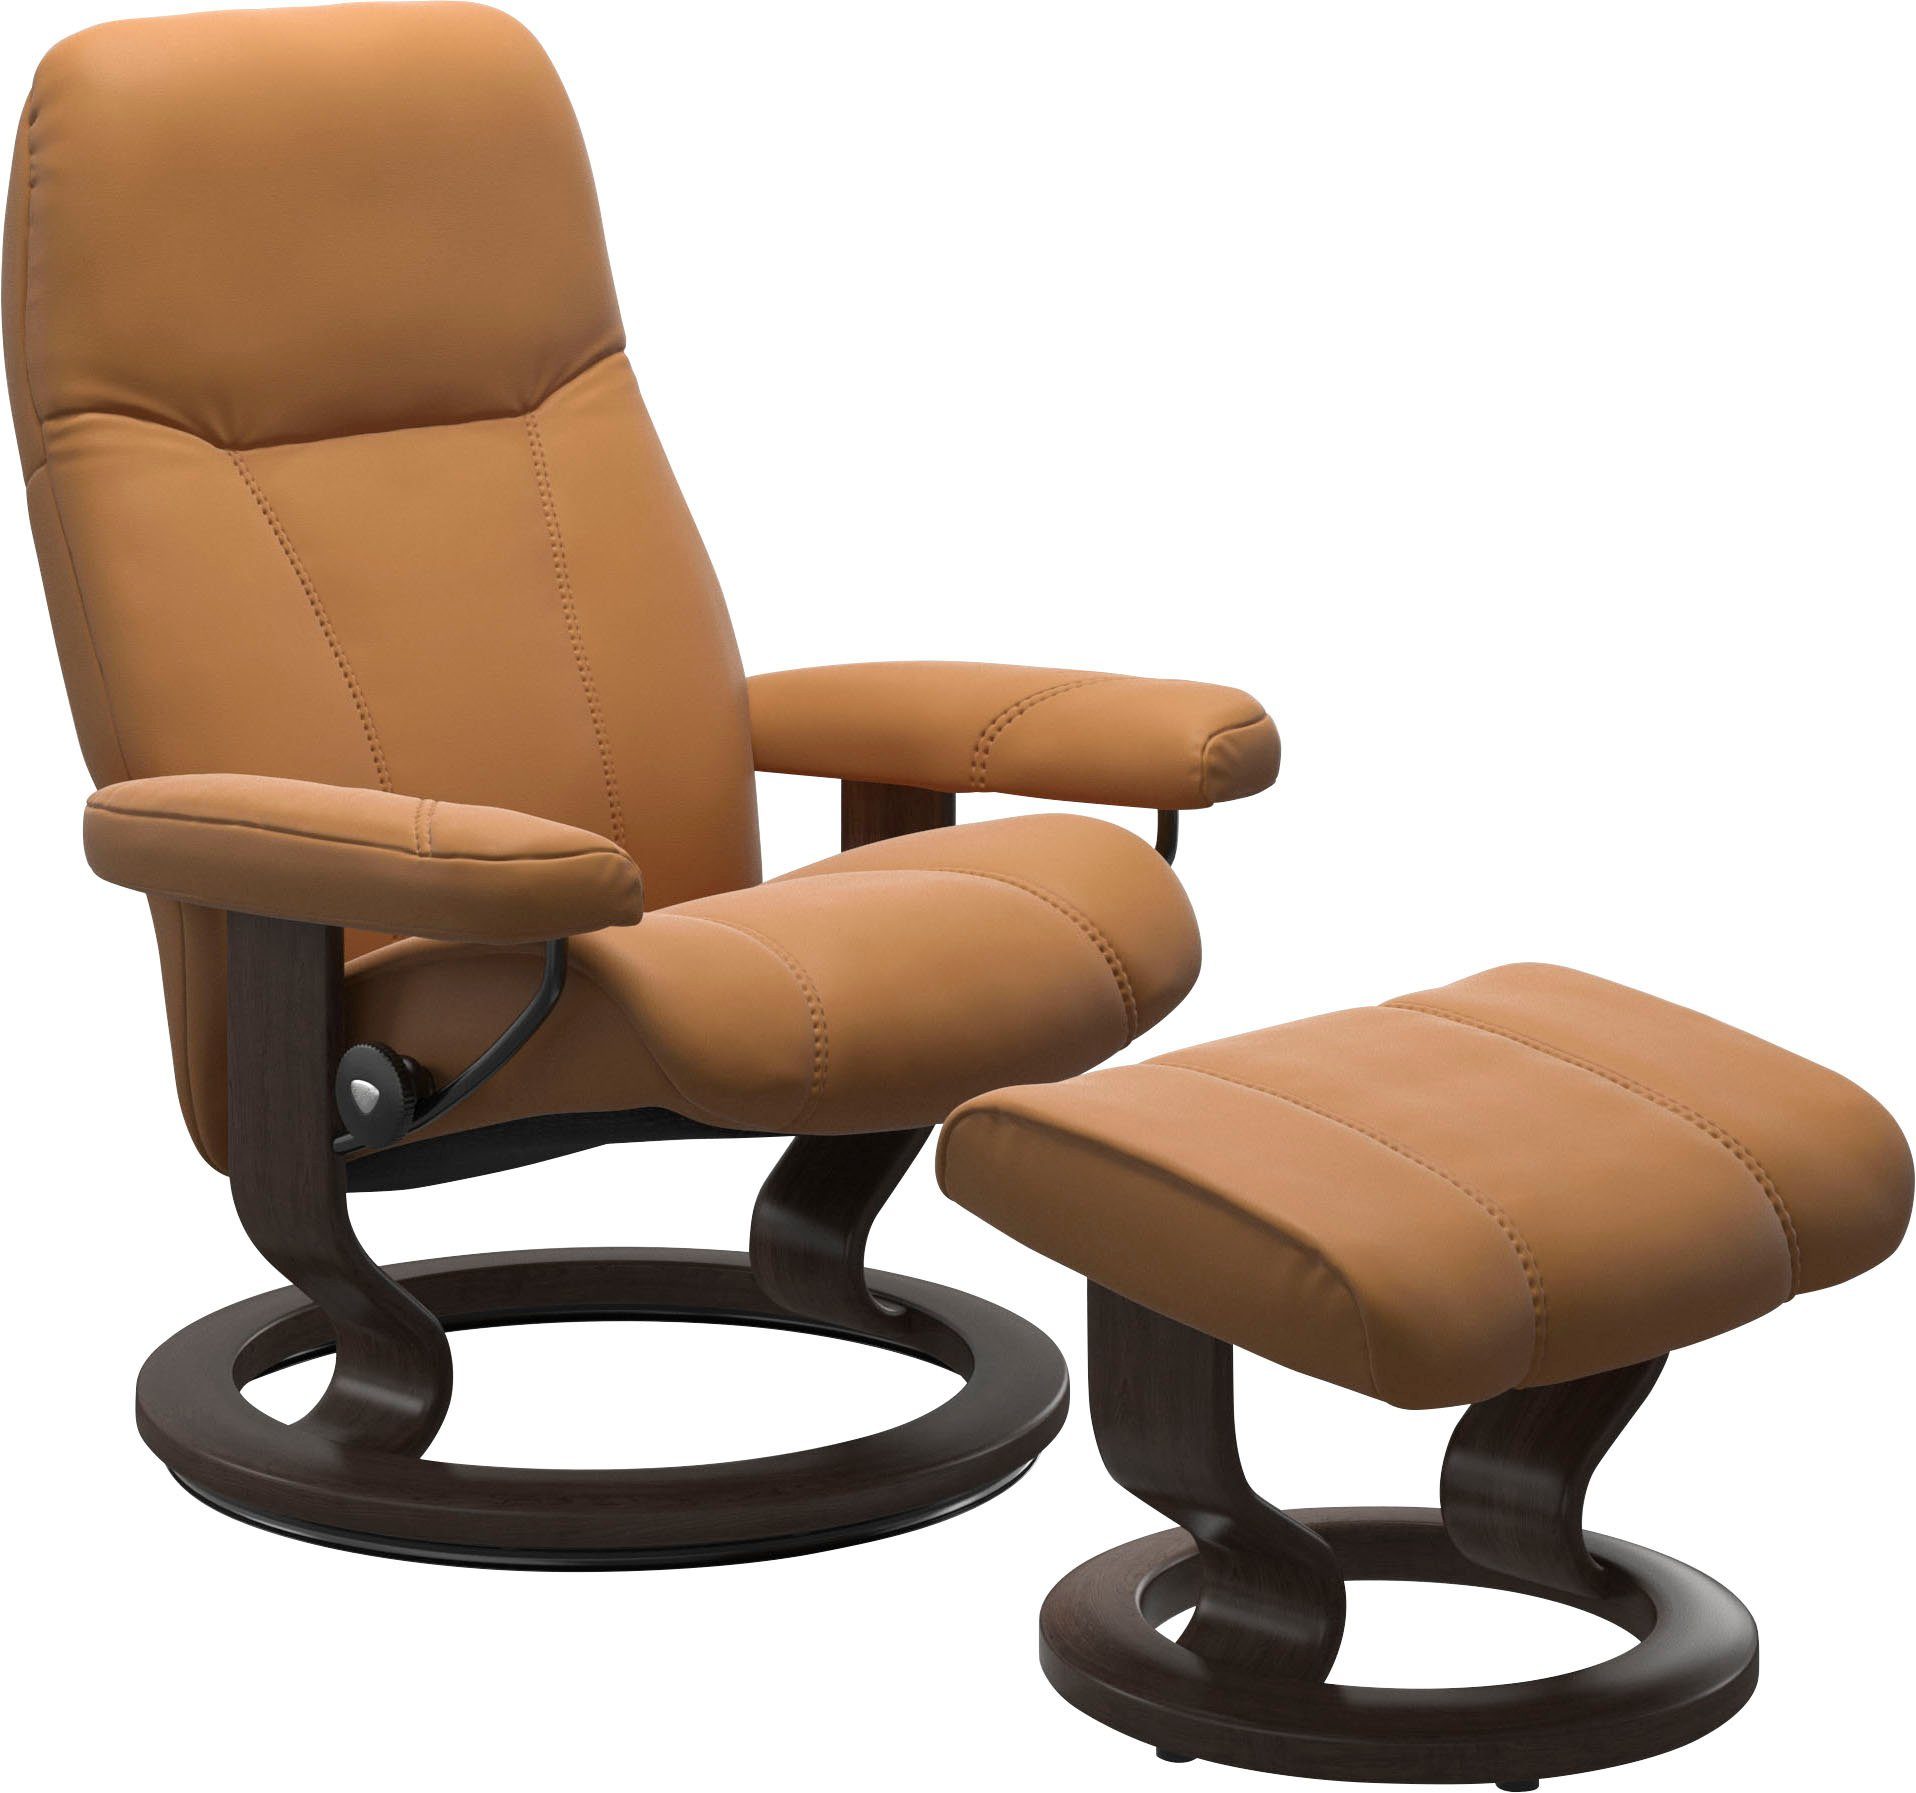 Consul, Relaxsessel Base, Classic Wenge Größe Stressless® Gestell S, mit